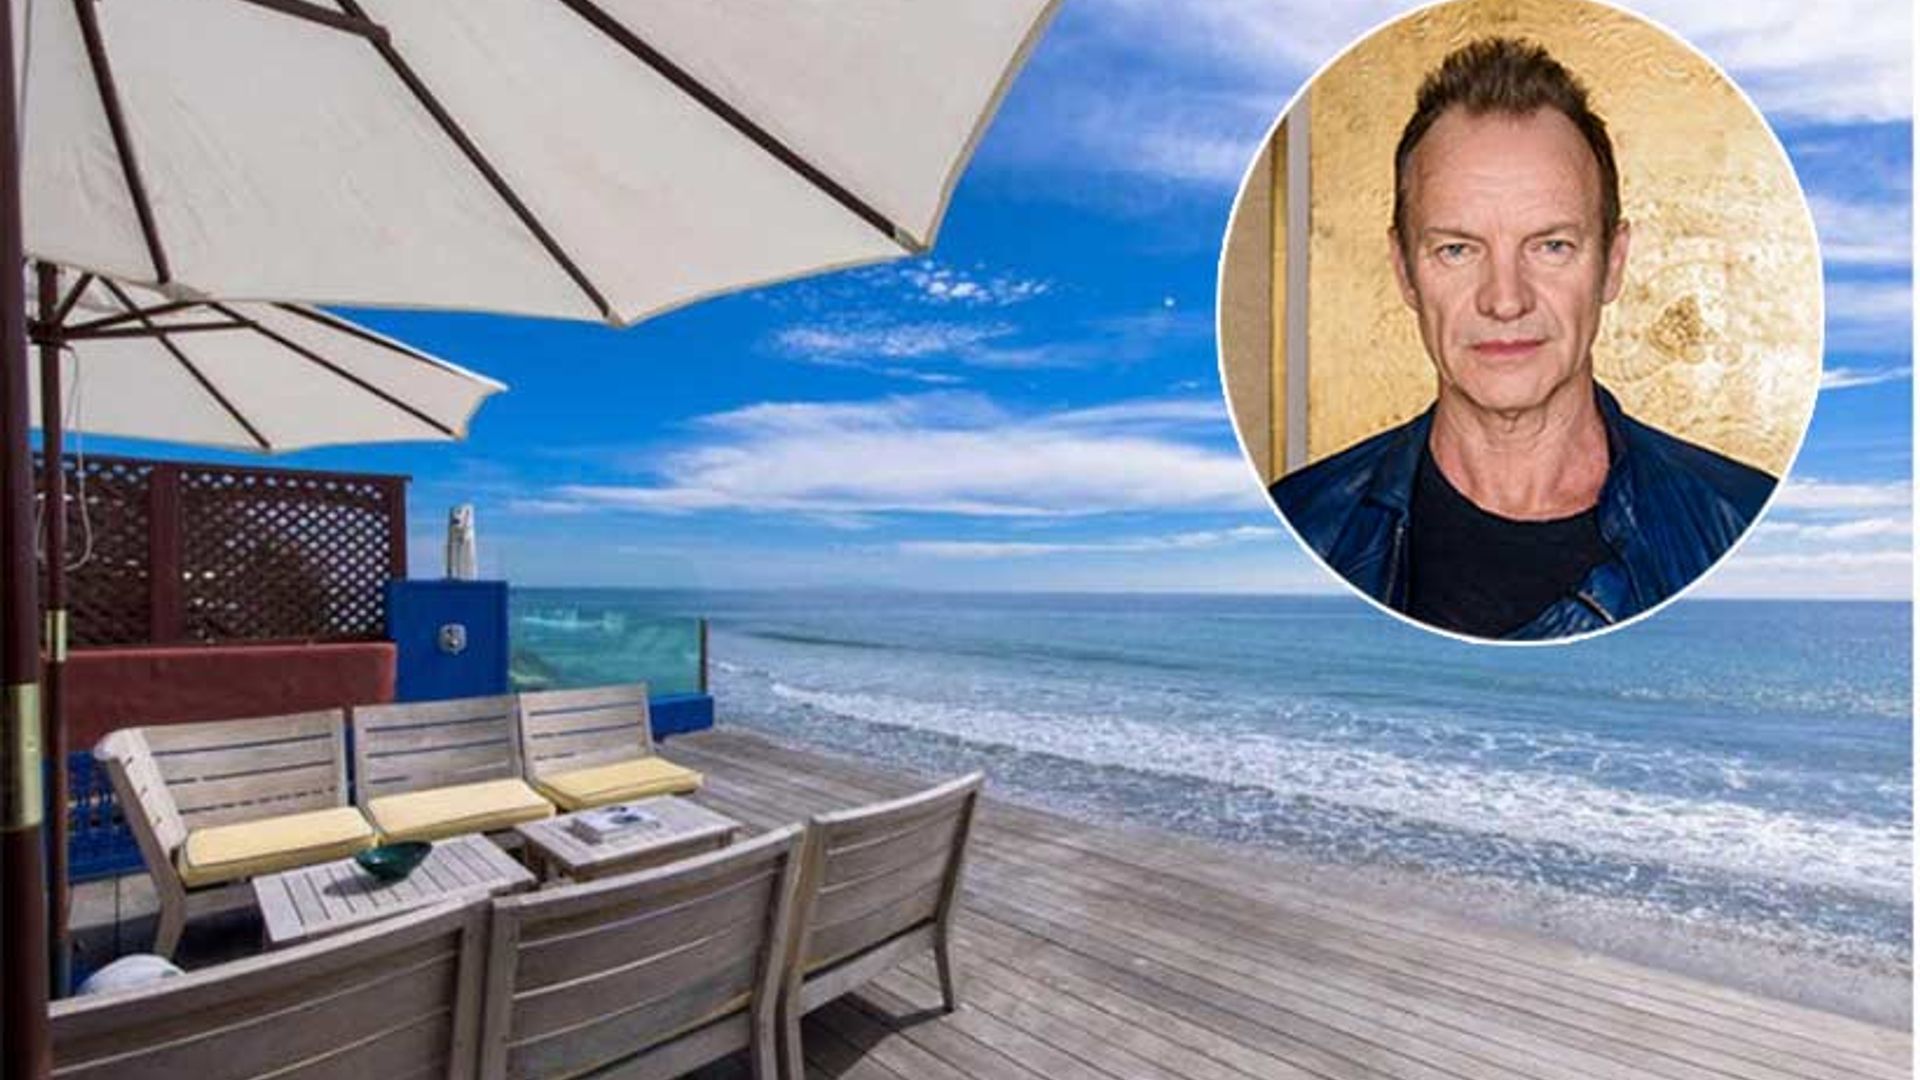 You can now holiday in Sting's Malibu beach house: see photos